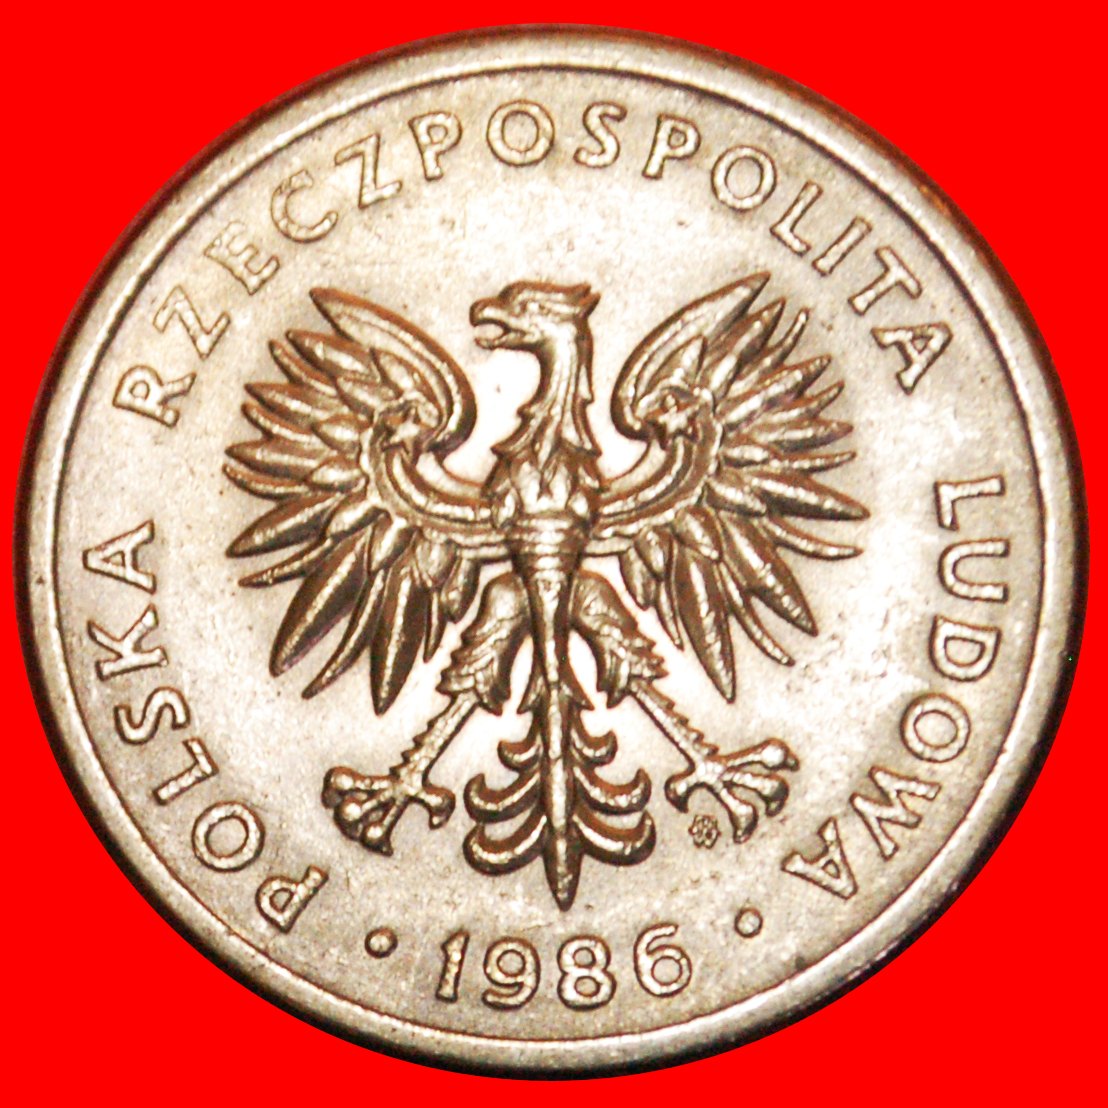  * SOCIALIST STARS ON EAGLE: POLAND ★20 ZLOTY 1986! DISCOVERY COIN! UNCOMMON ★LOW START ★ NO RESERVE!   